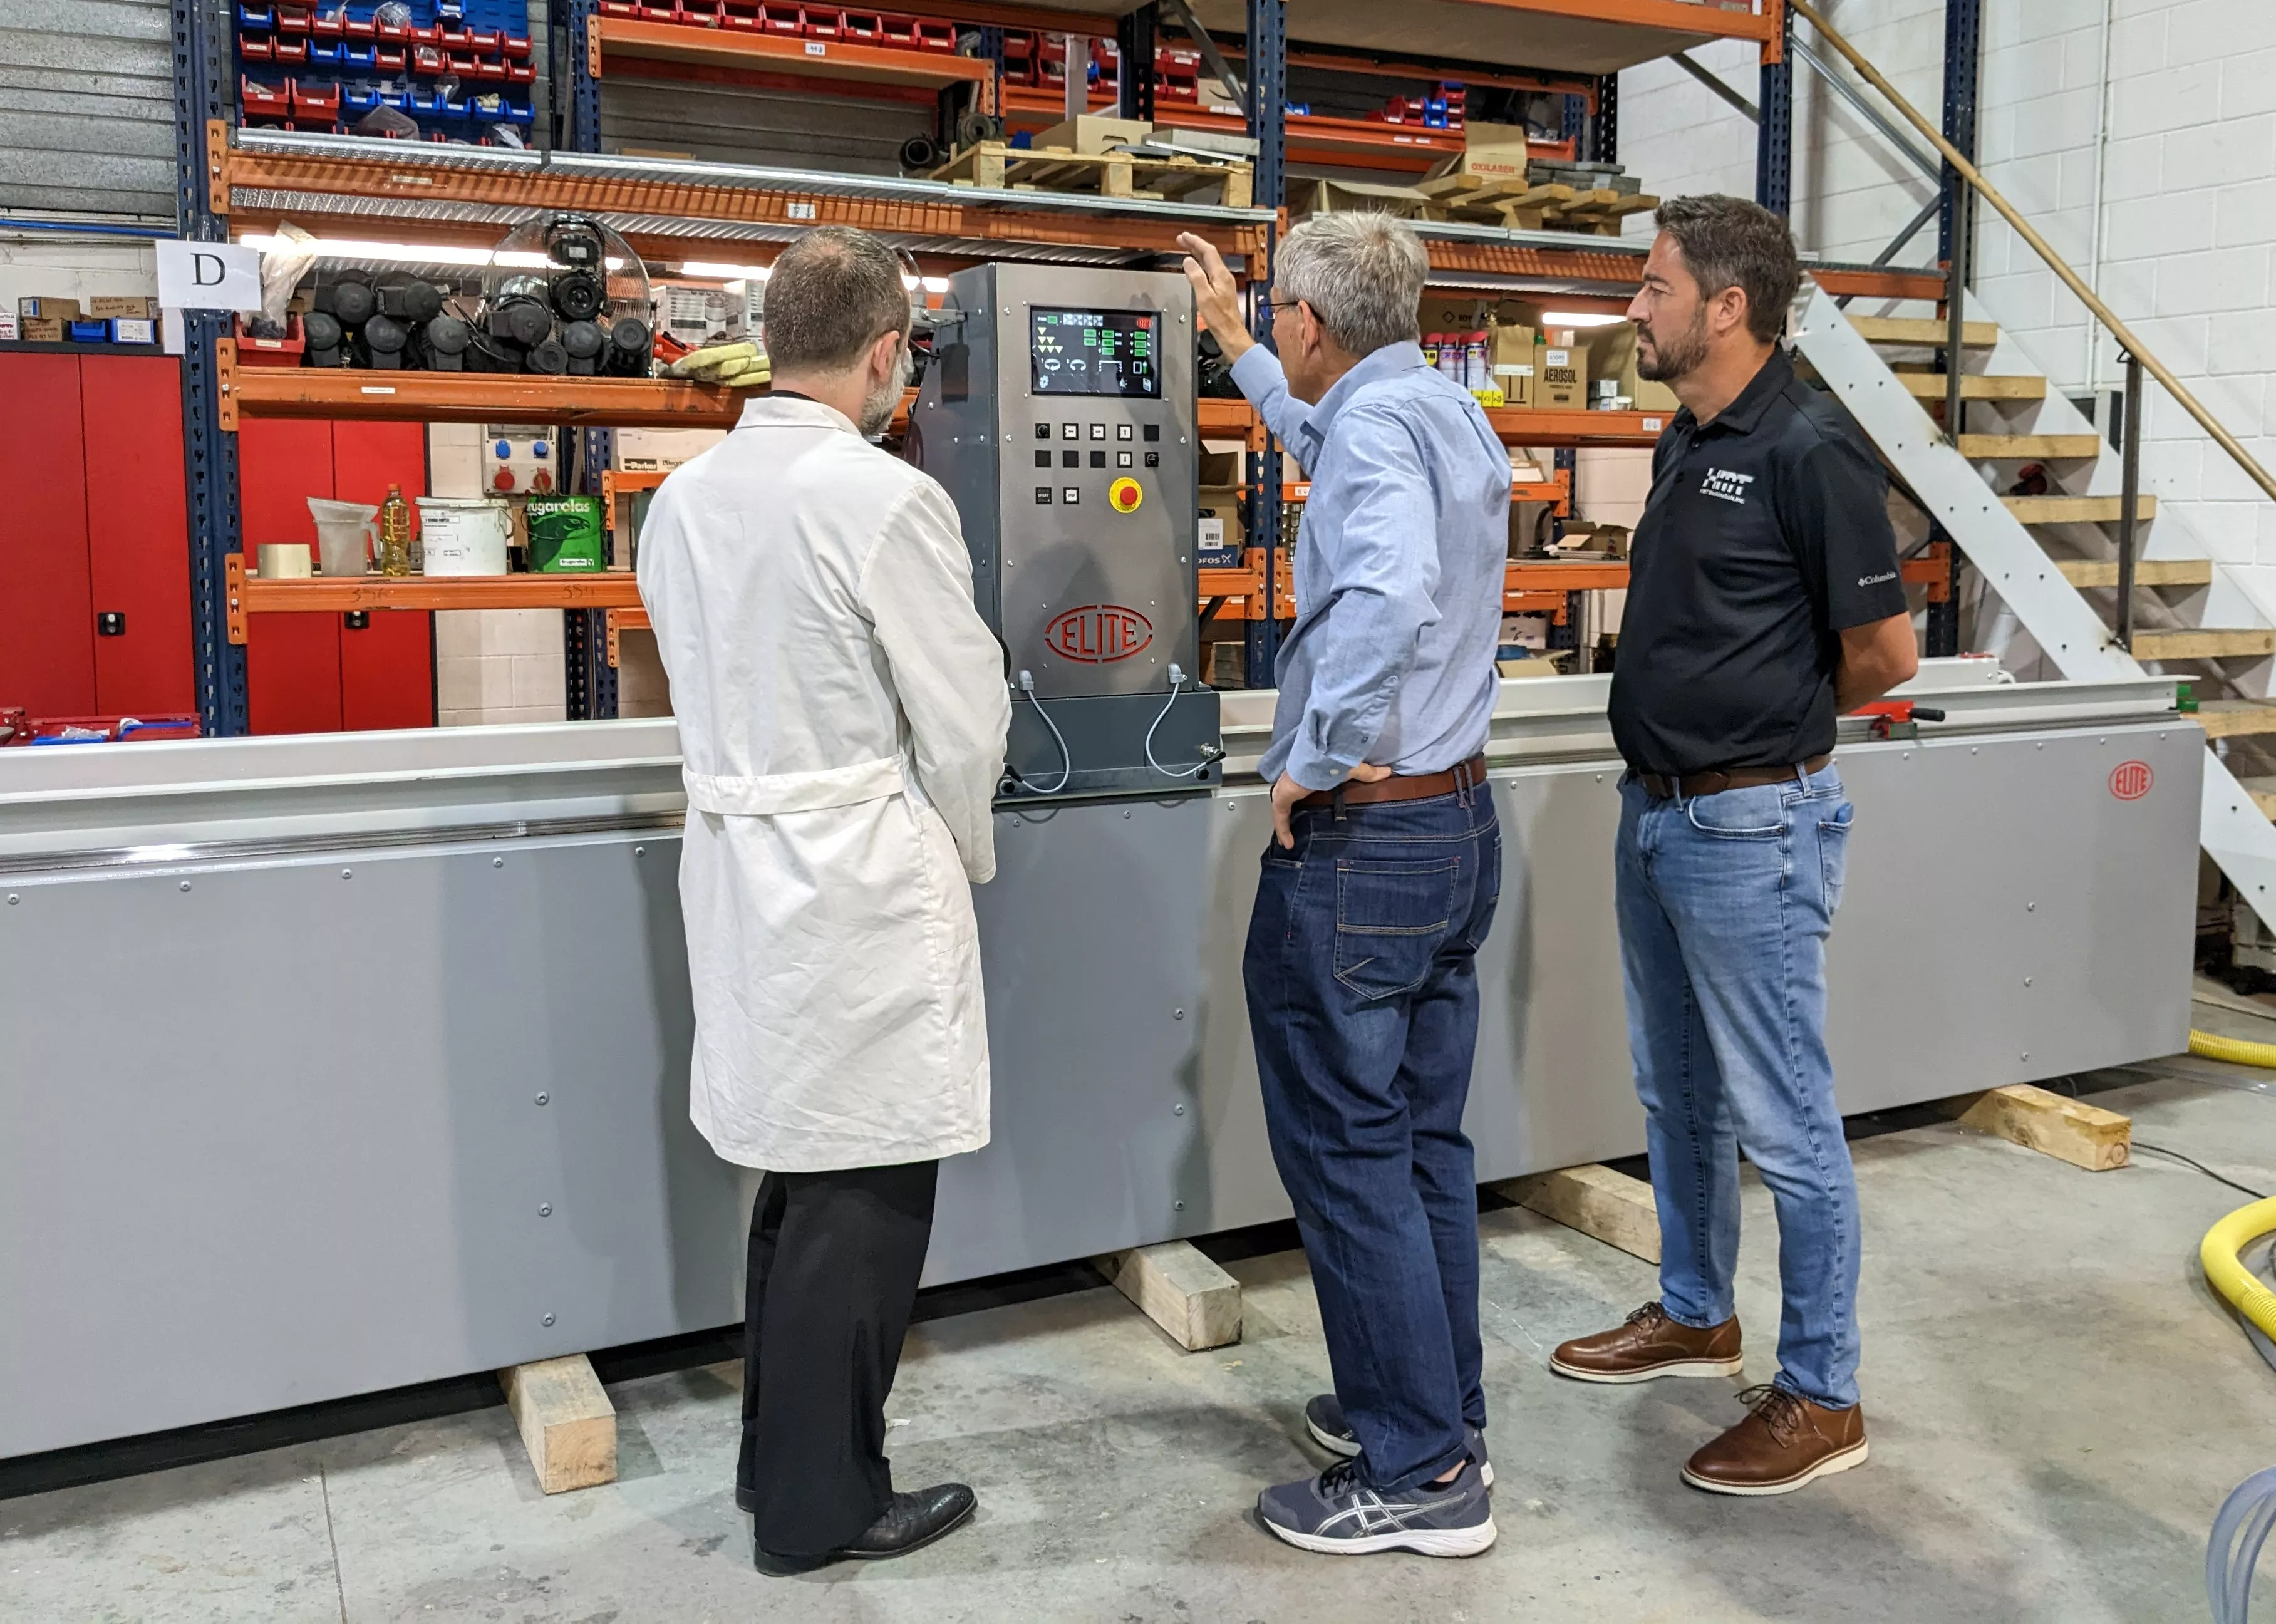 Eccles Saw & Tool expands its sharpening services with ELITE